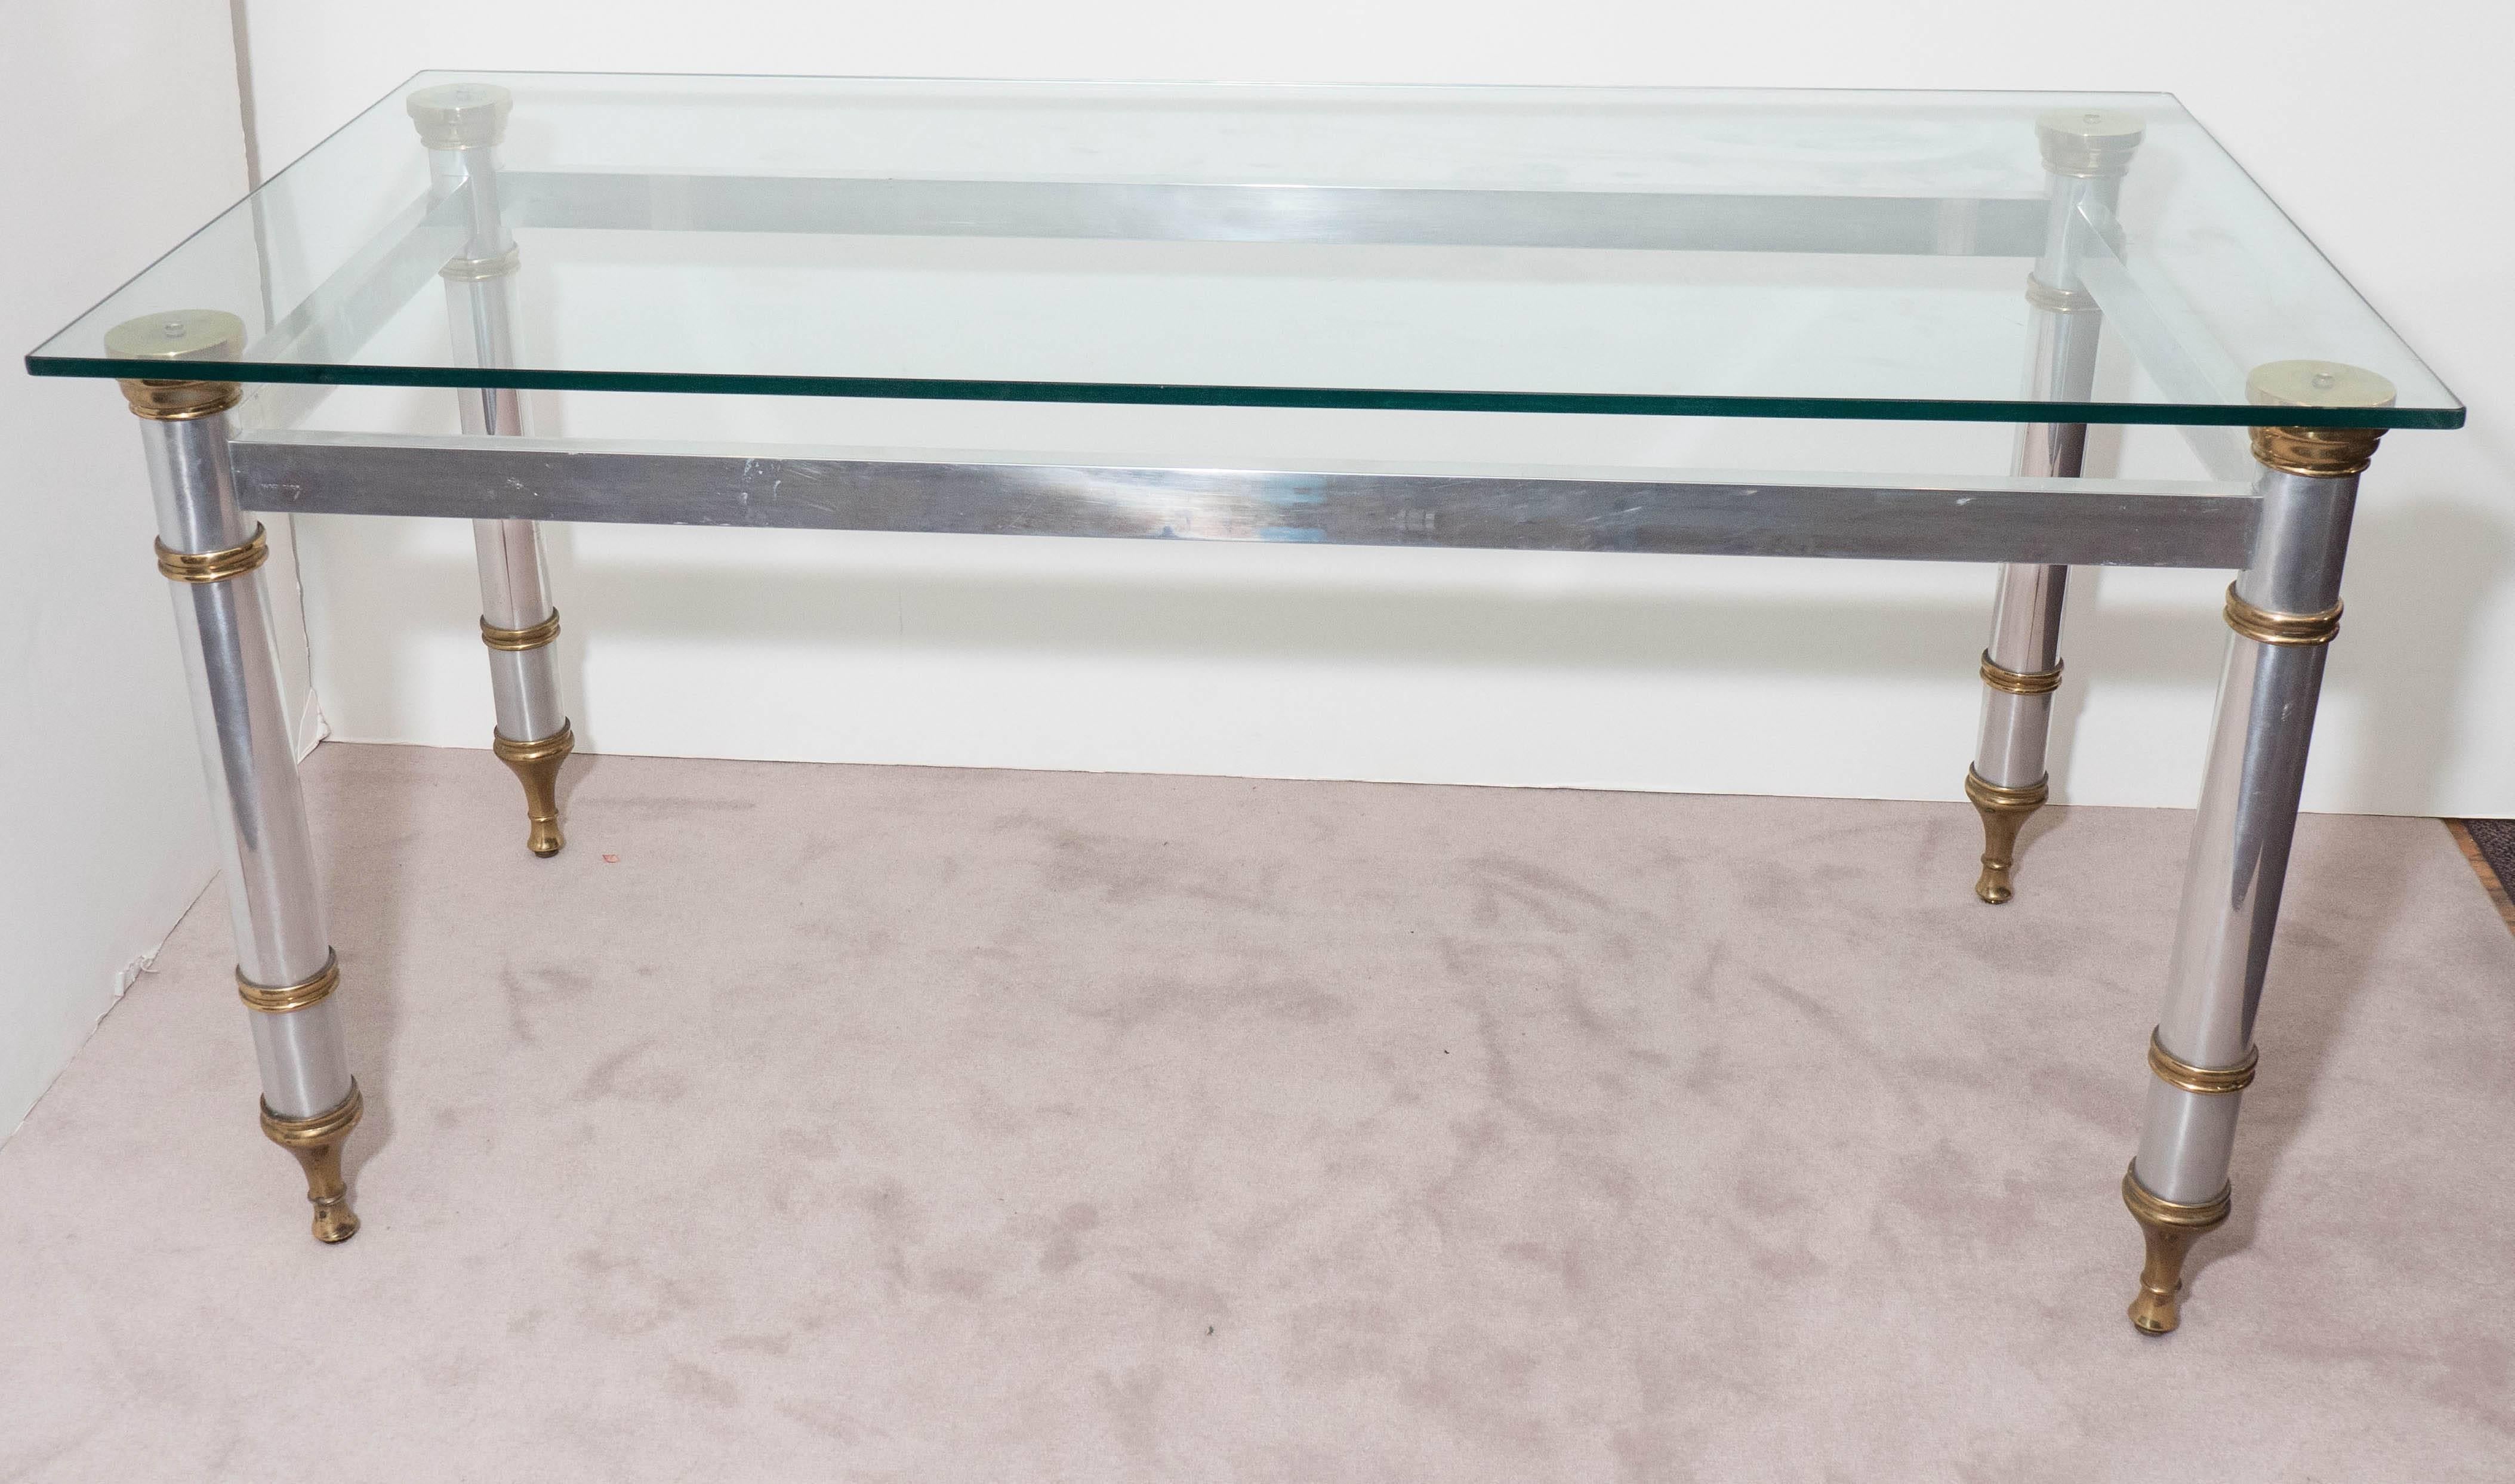 A highly versatile glass top table, influenced by the Directoire style, which can alternate as a dining table or desk, produced circa 1960s by Maison Jansen of Paris (signed), on steel base and tapered legs, accented with brass. Markings include